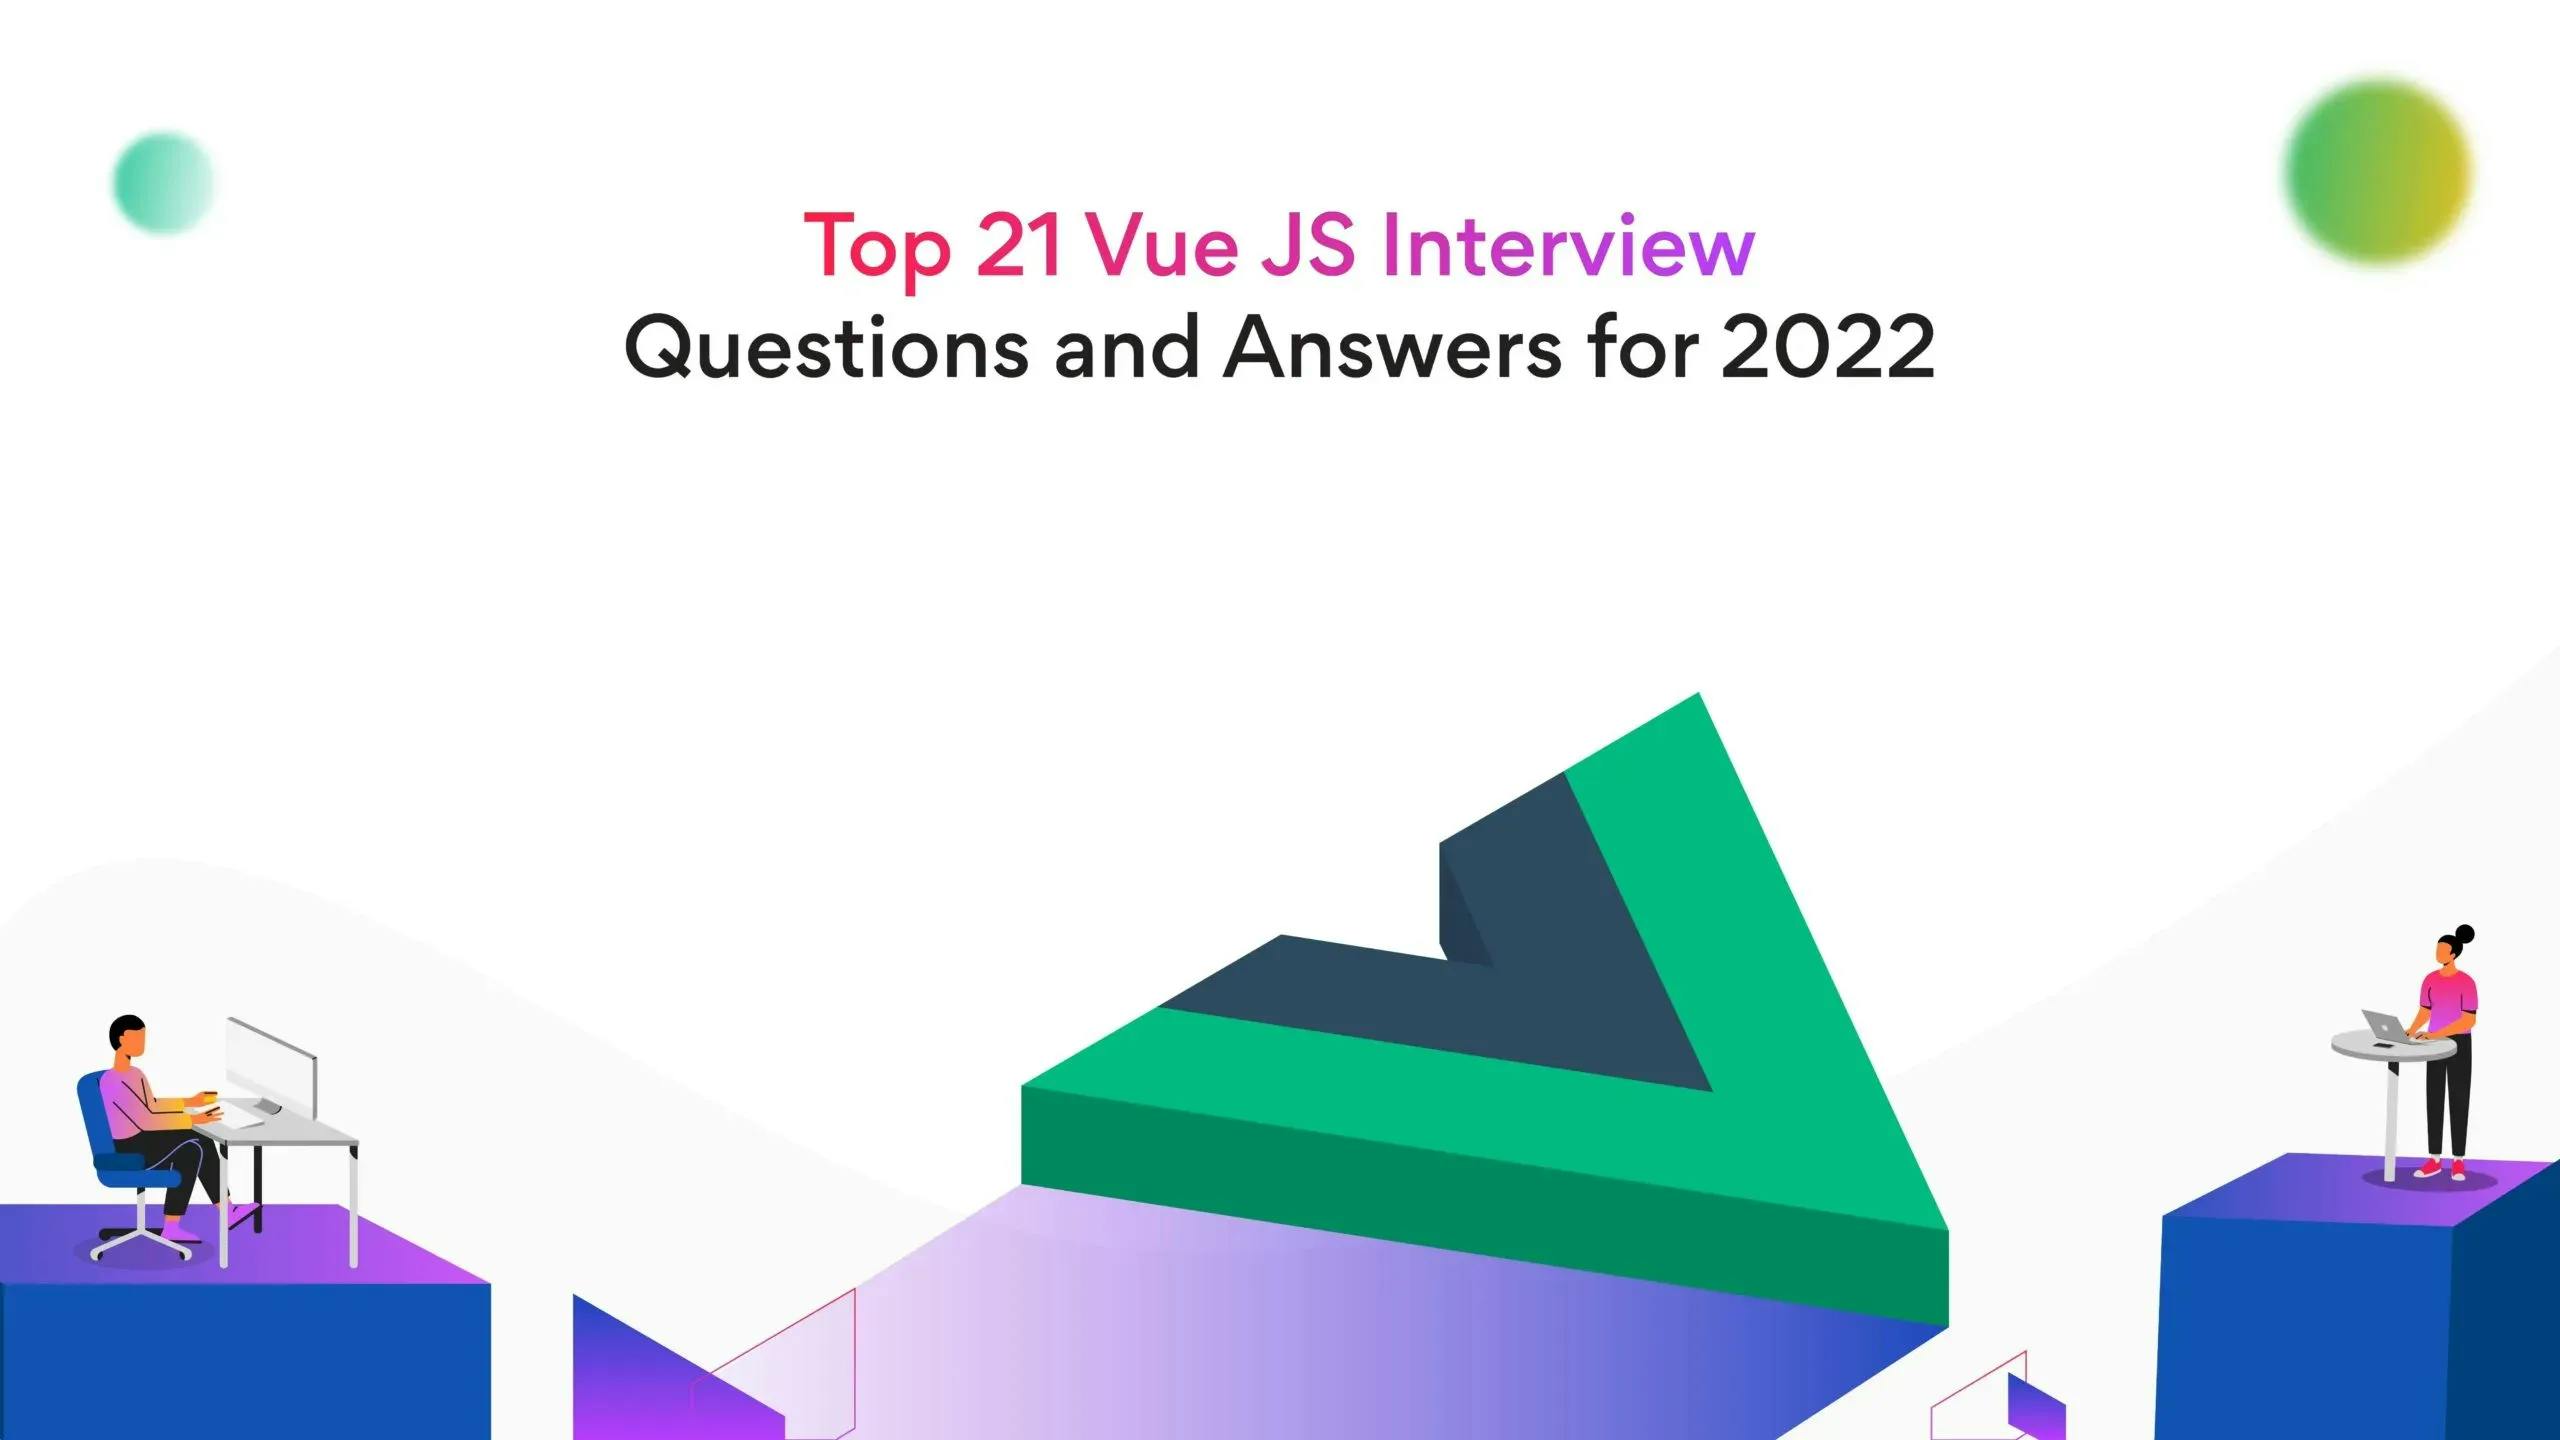 Top 21 Vue JS Interview Questions and Answers